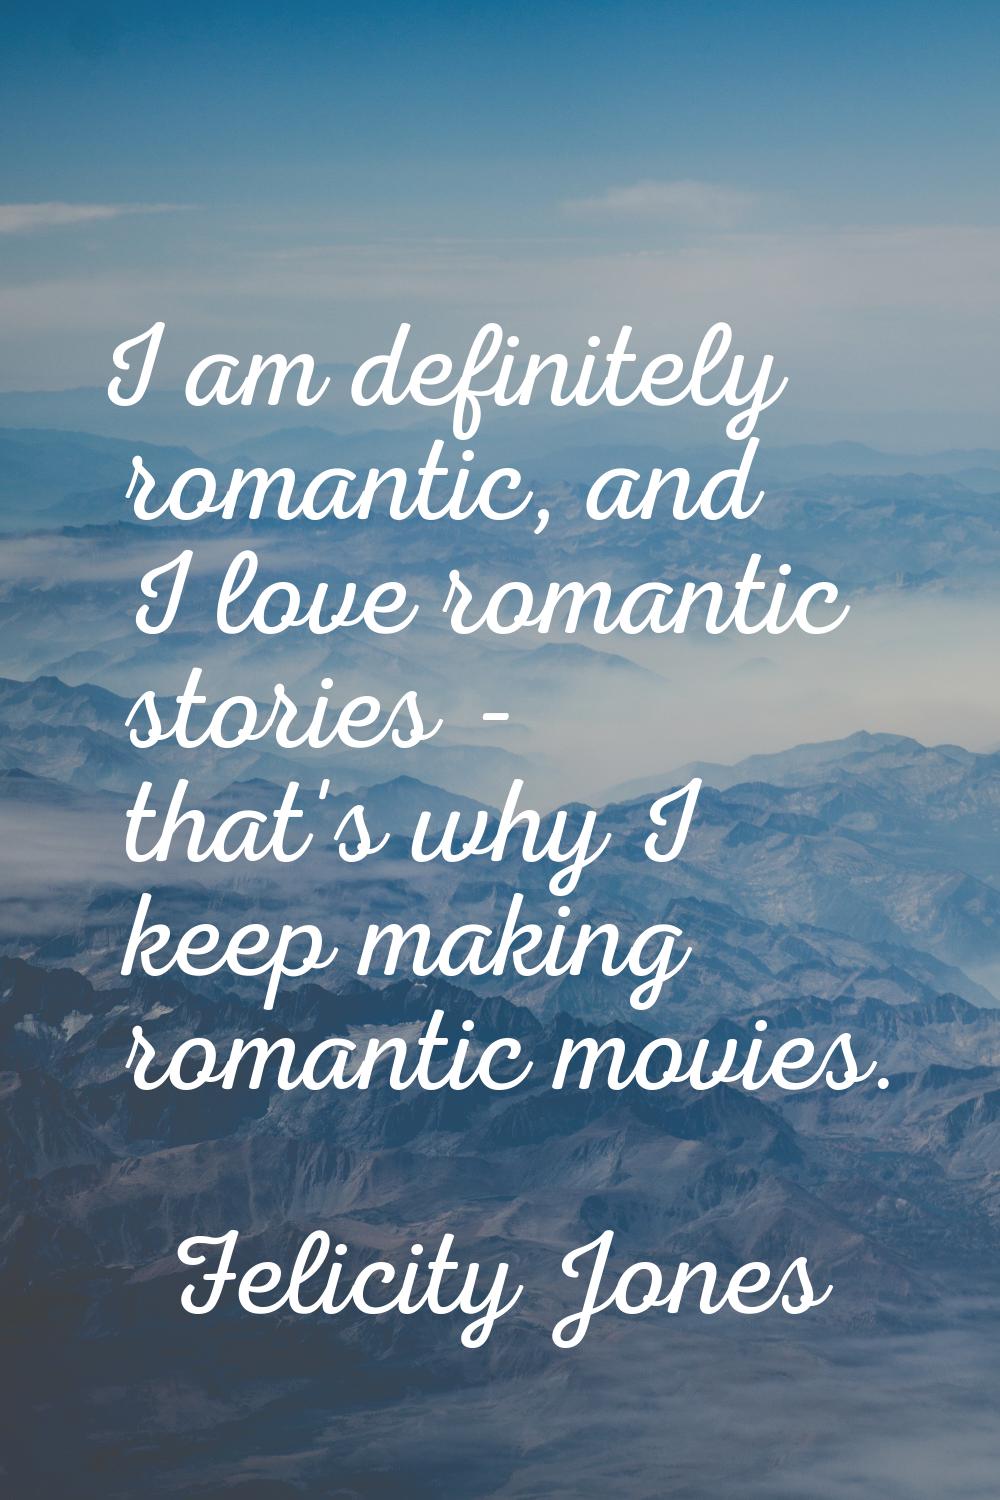 I am definitely romantic, and I love romantic stories - that's why I keep making romantic movies.